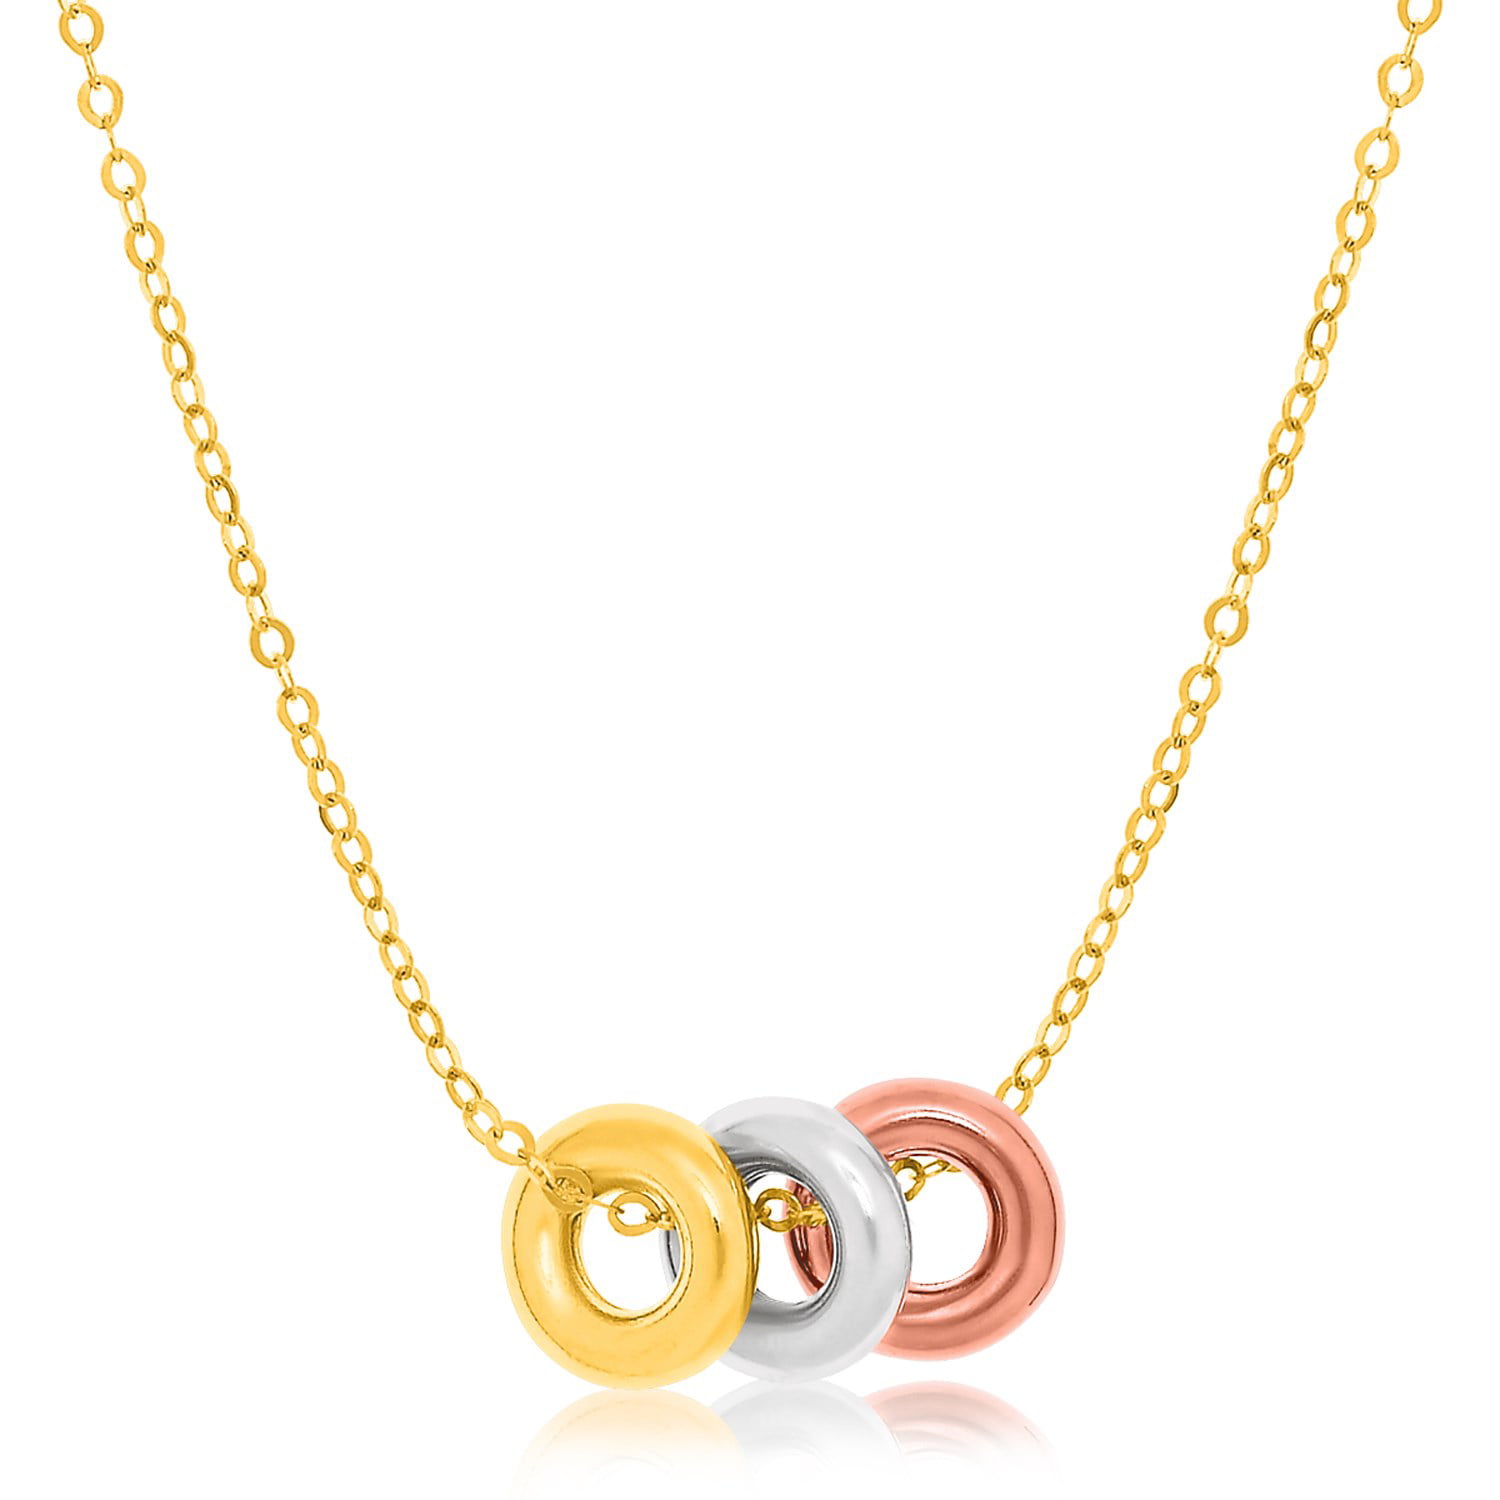 14K Tri-Color Gold Chain Necklace with Three Open Circle Accents